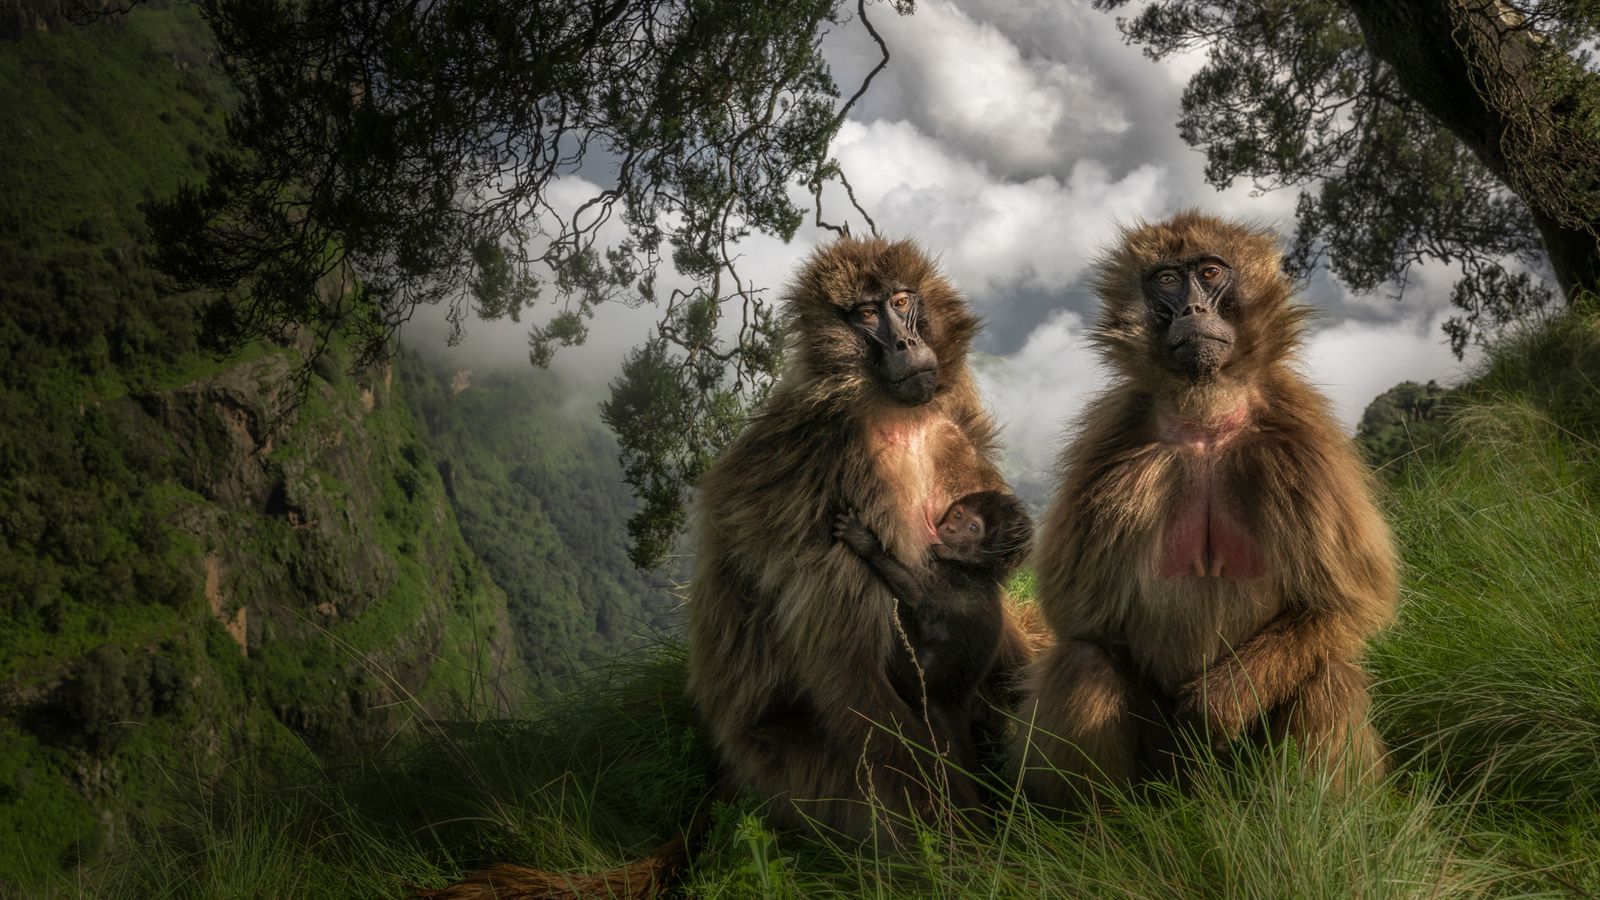 From rare bats to curious lion cubs: The 25 pictures shortlisted for the Wildlife Photographer of the Year contest